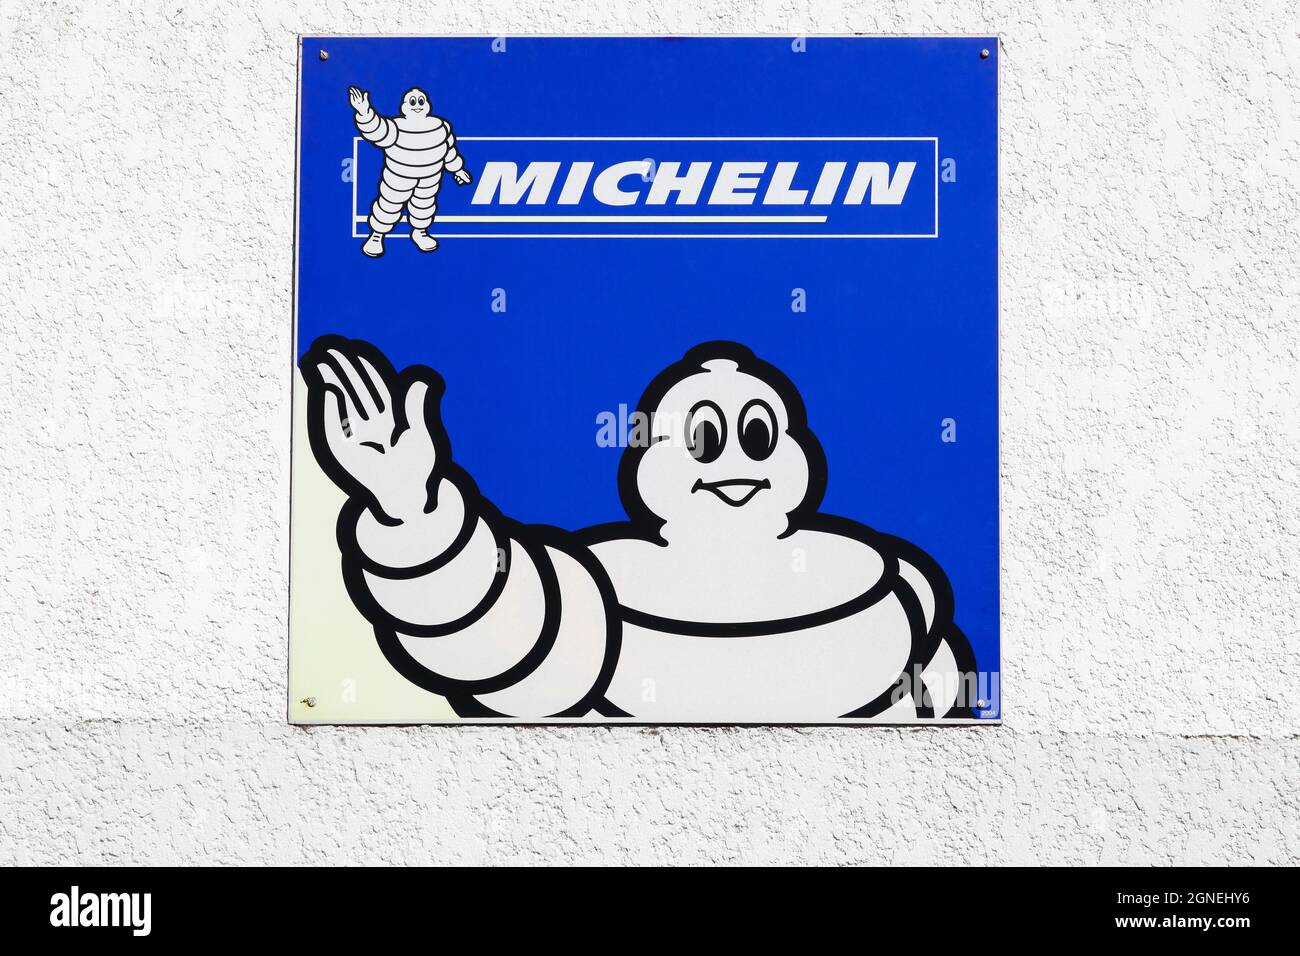 Jassans, France - March 28, 2020: Michelin logo on a wall. Michelin is a tire manufacturer based in Clermont-Ferrand in France Stock Photo